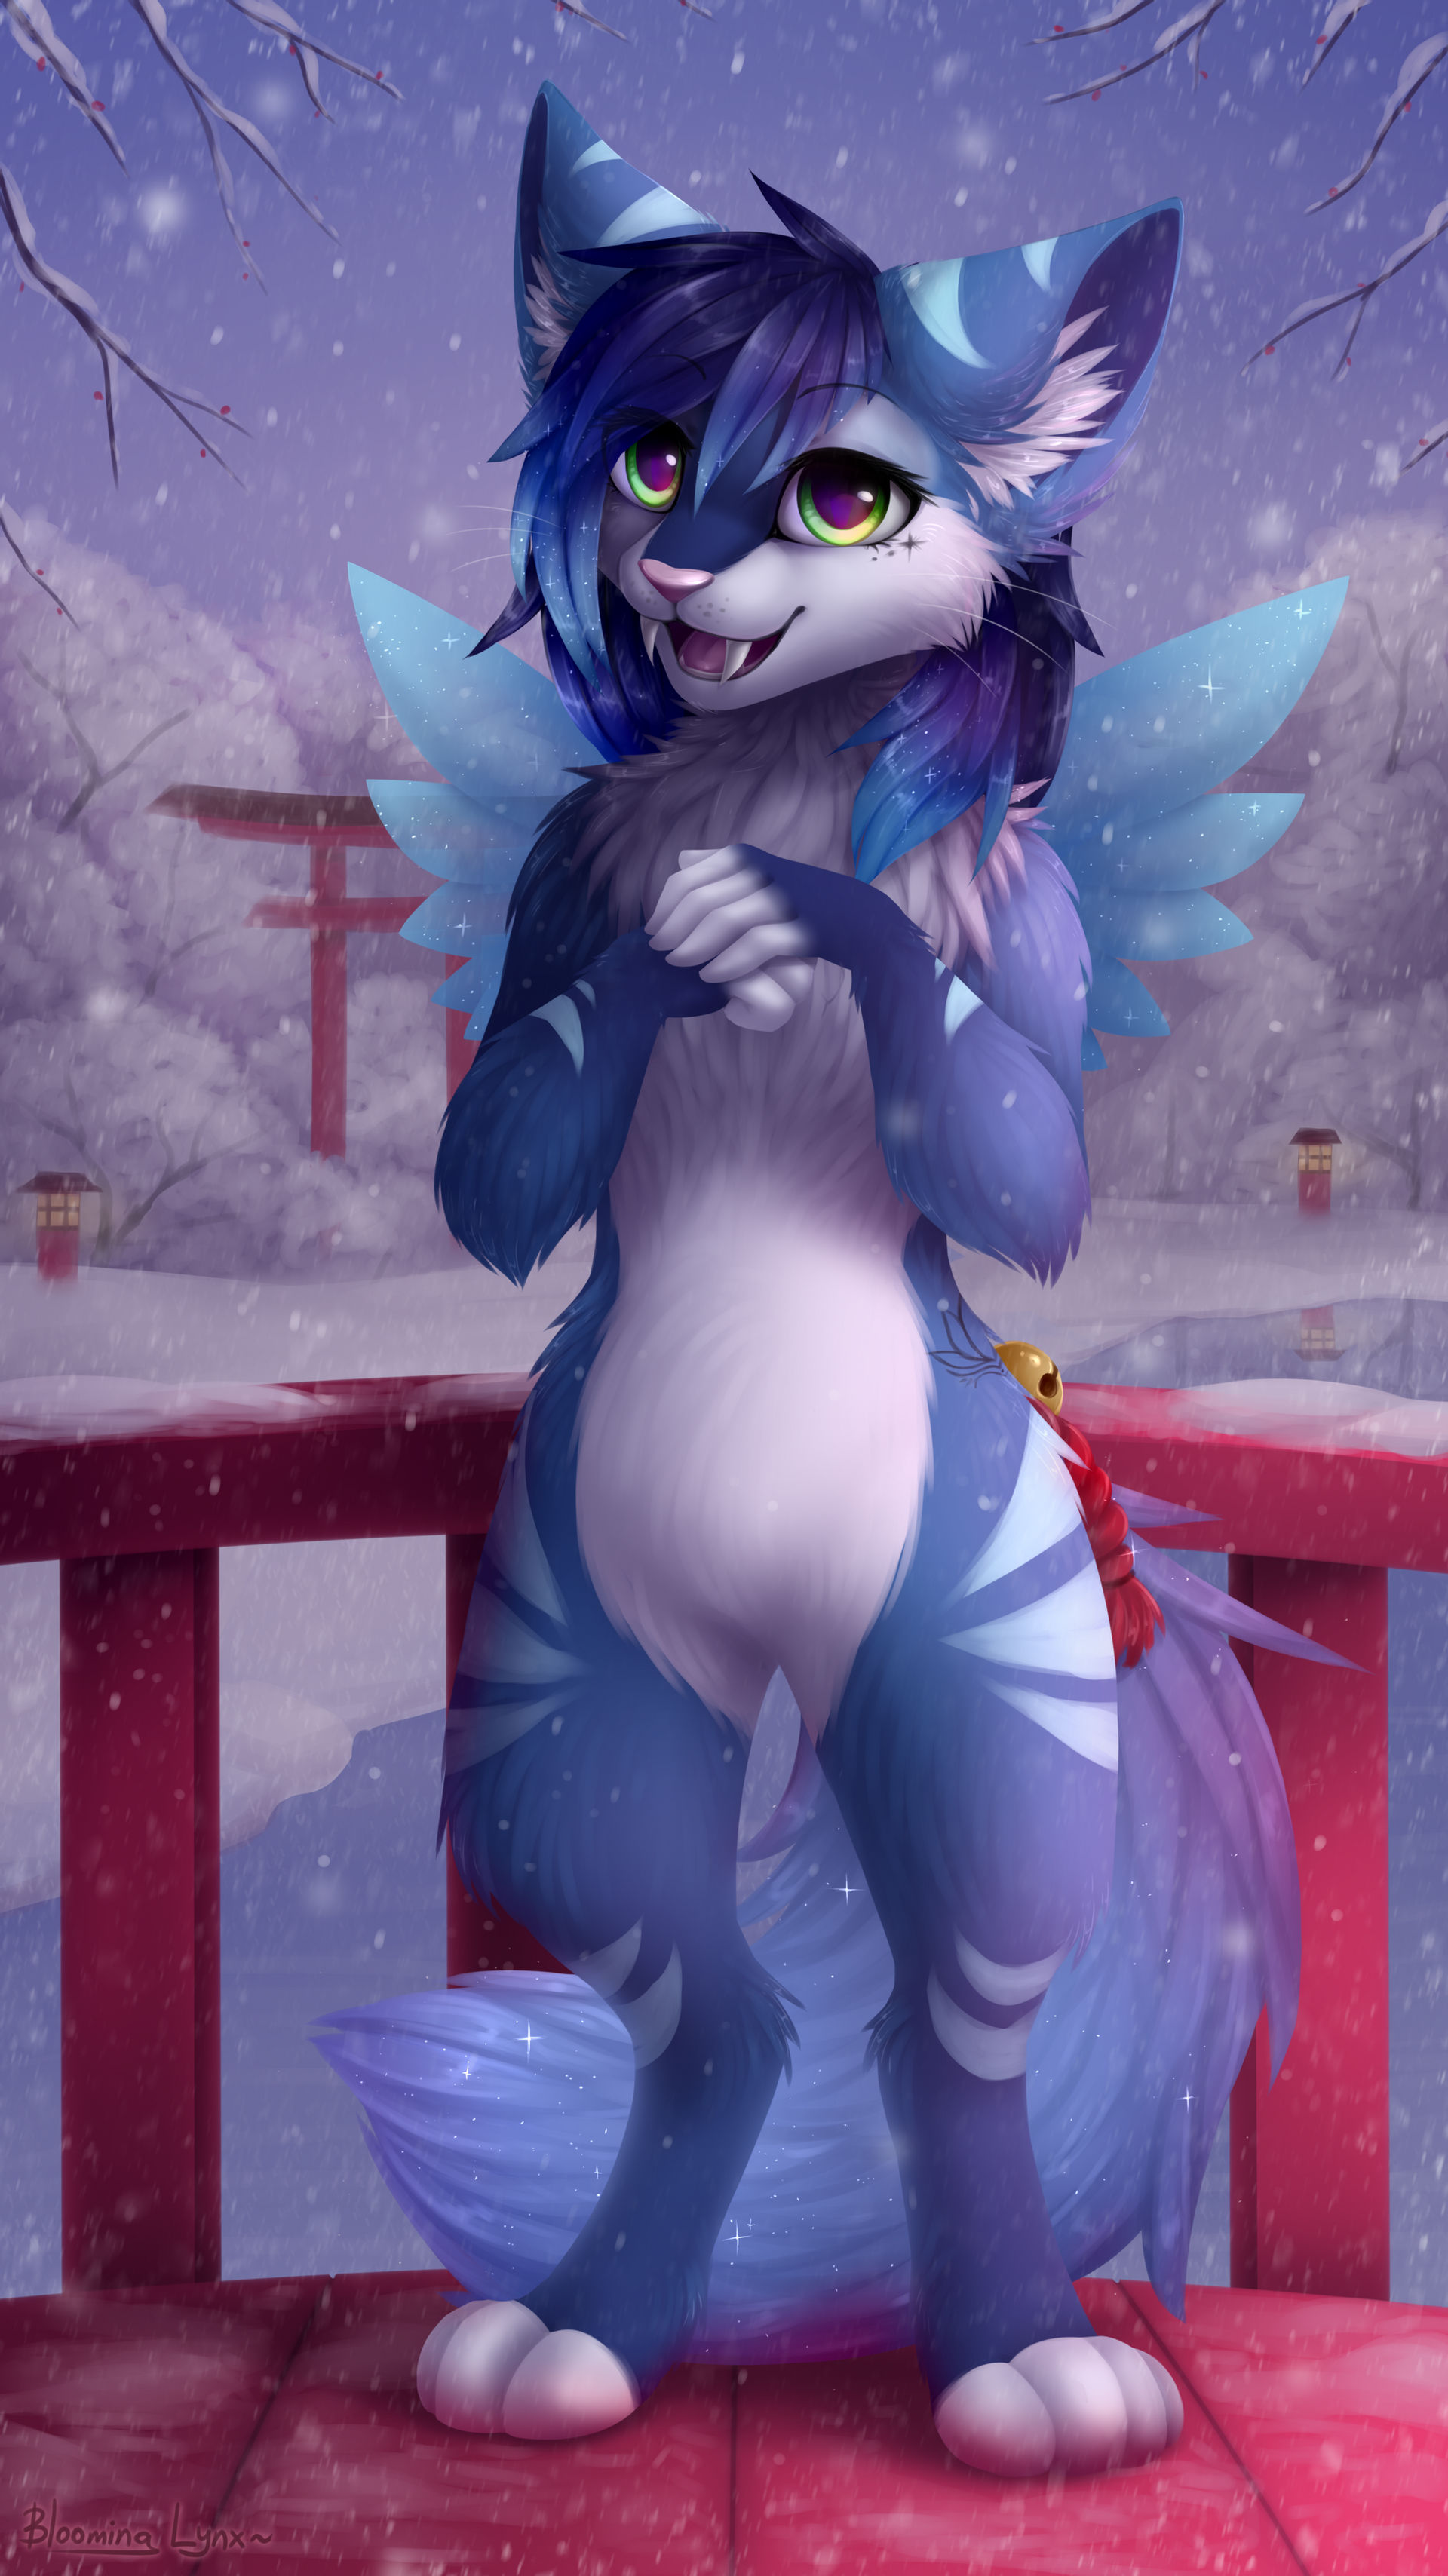 Magic winter by Blooming Lynx